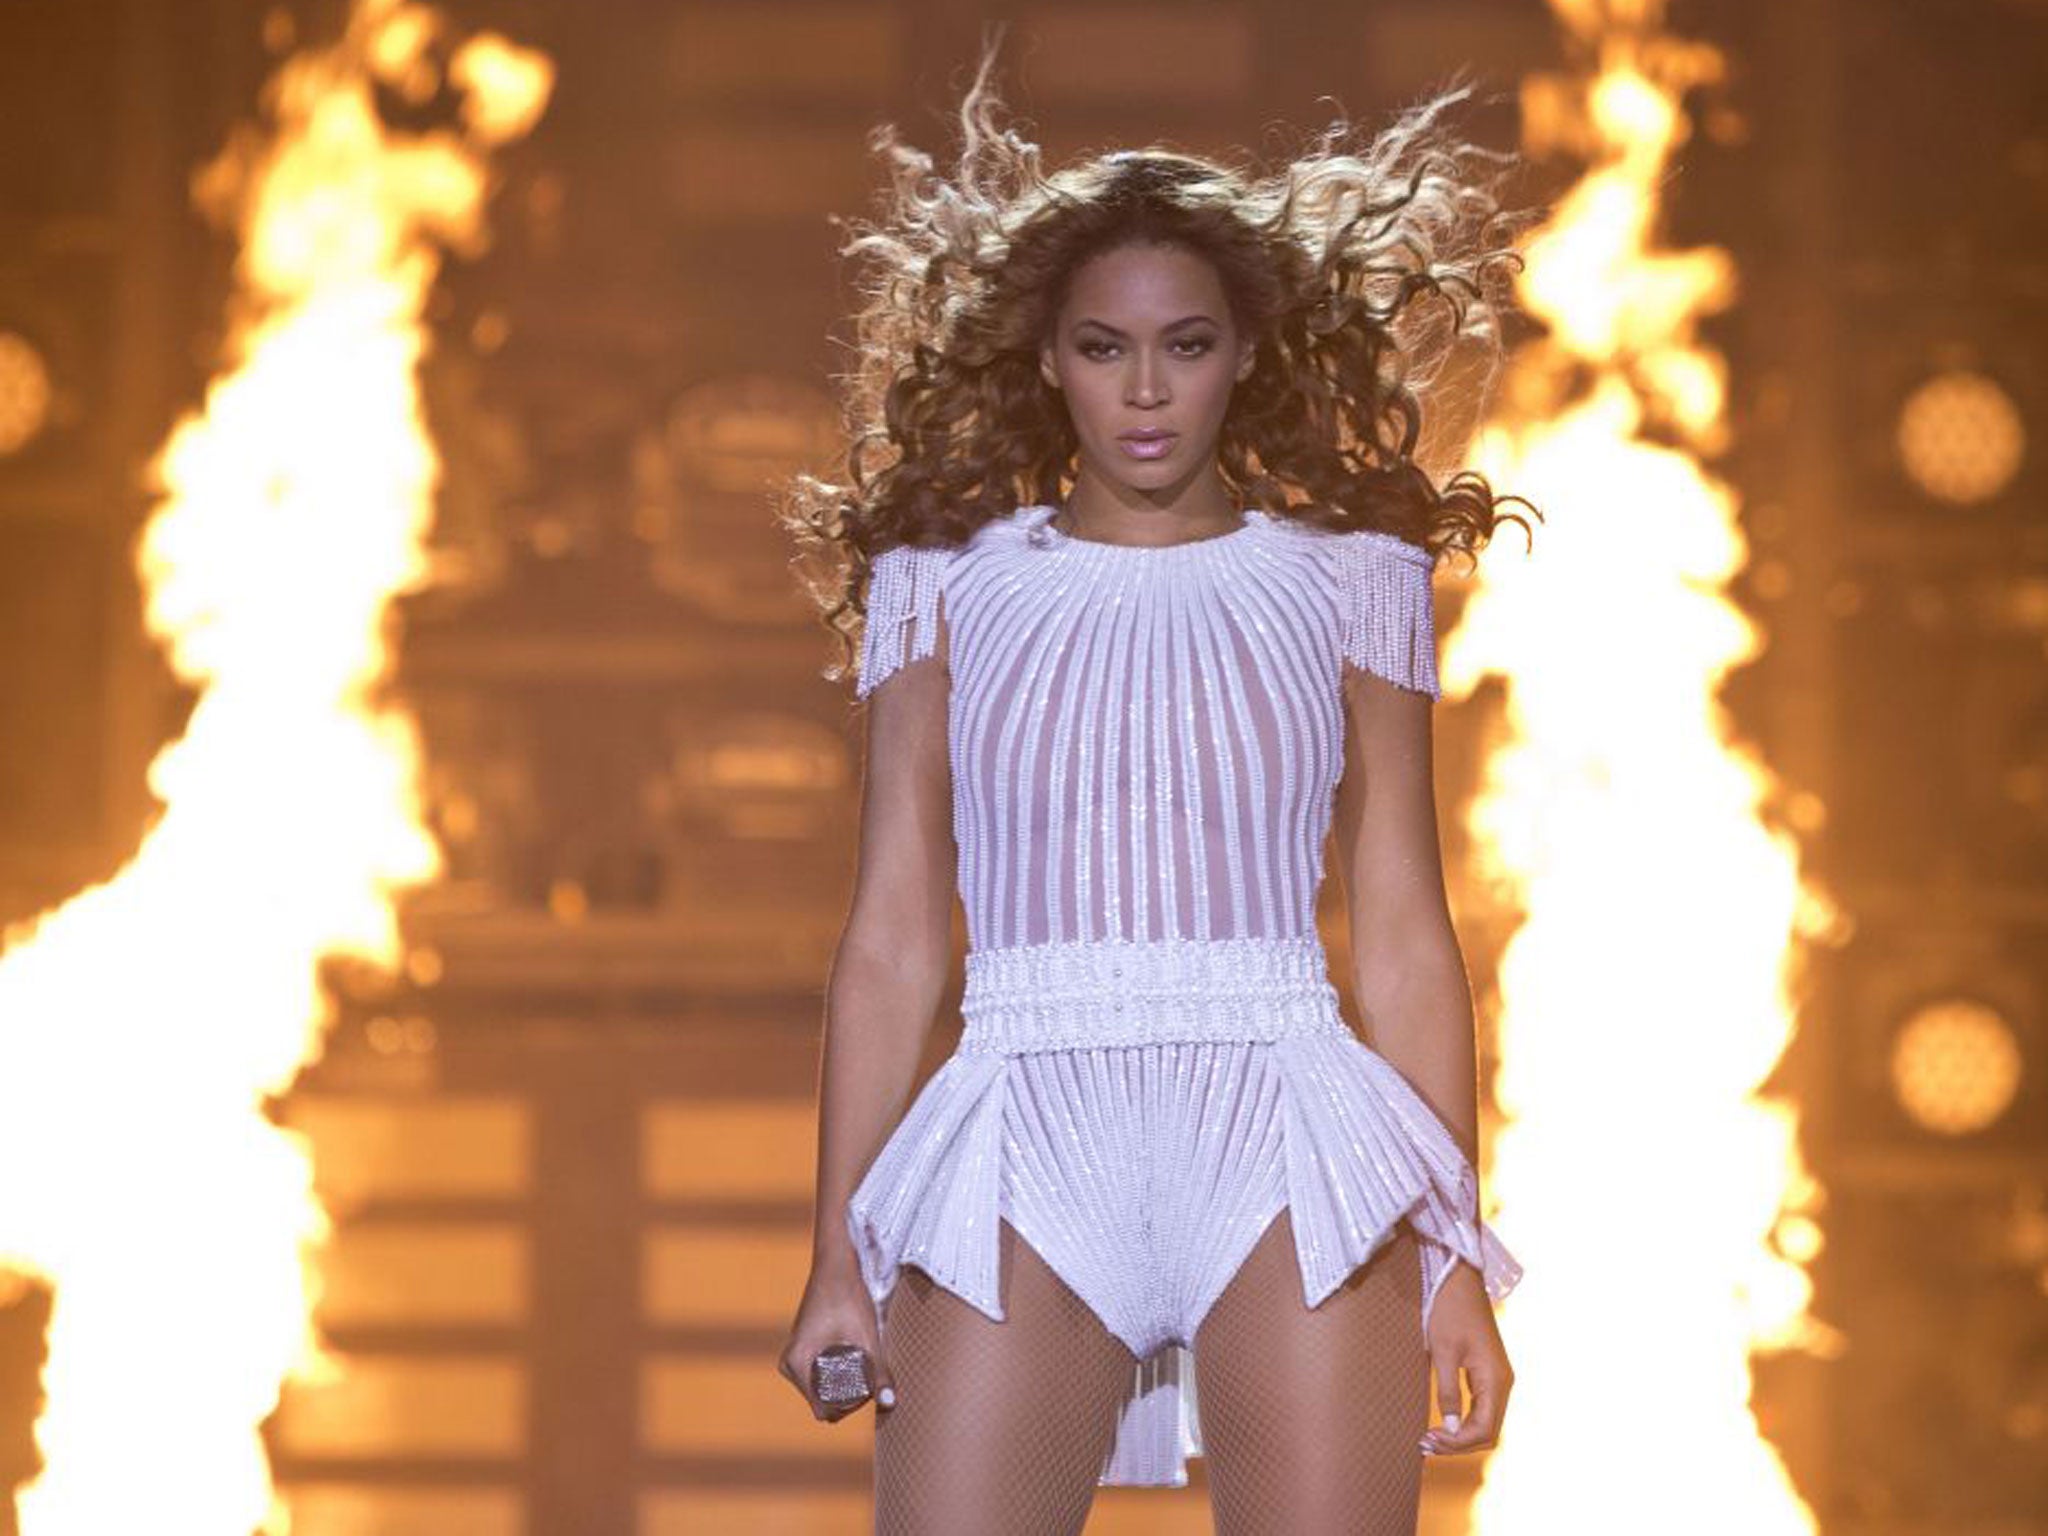 Flames, check. Wind machine, check. Beyoncé pulls out all of the theatrical stops on her tour